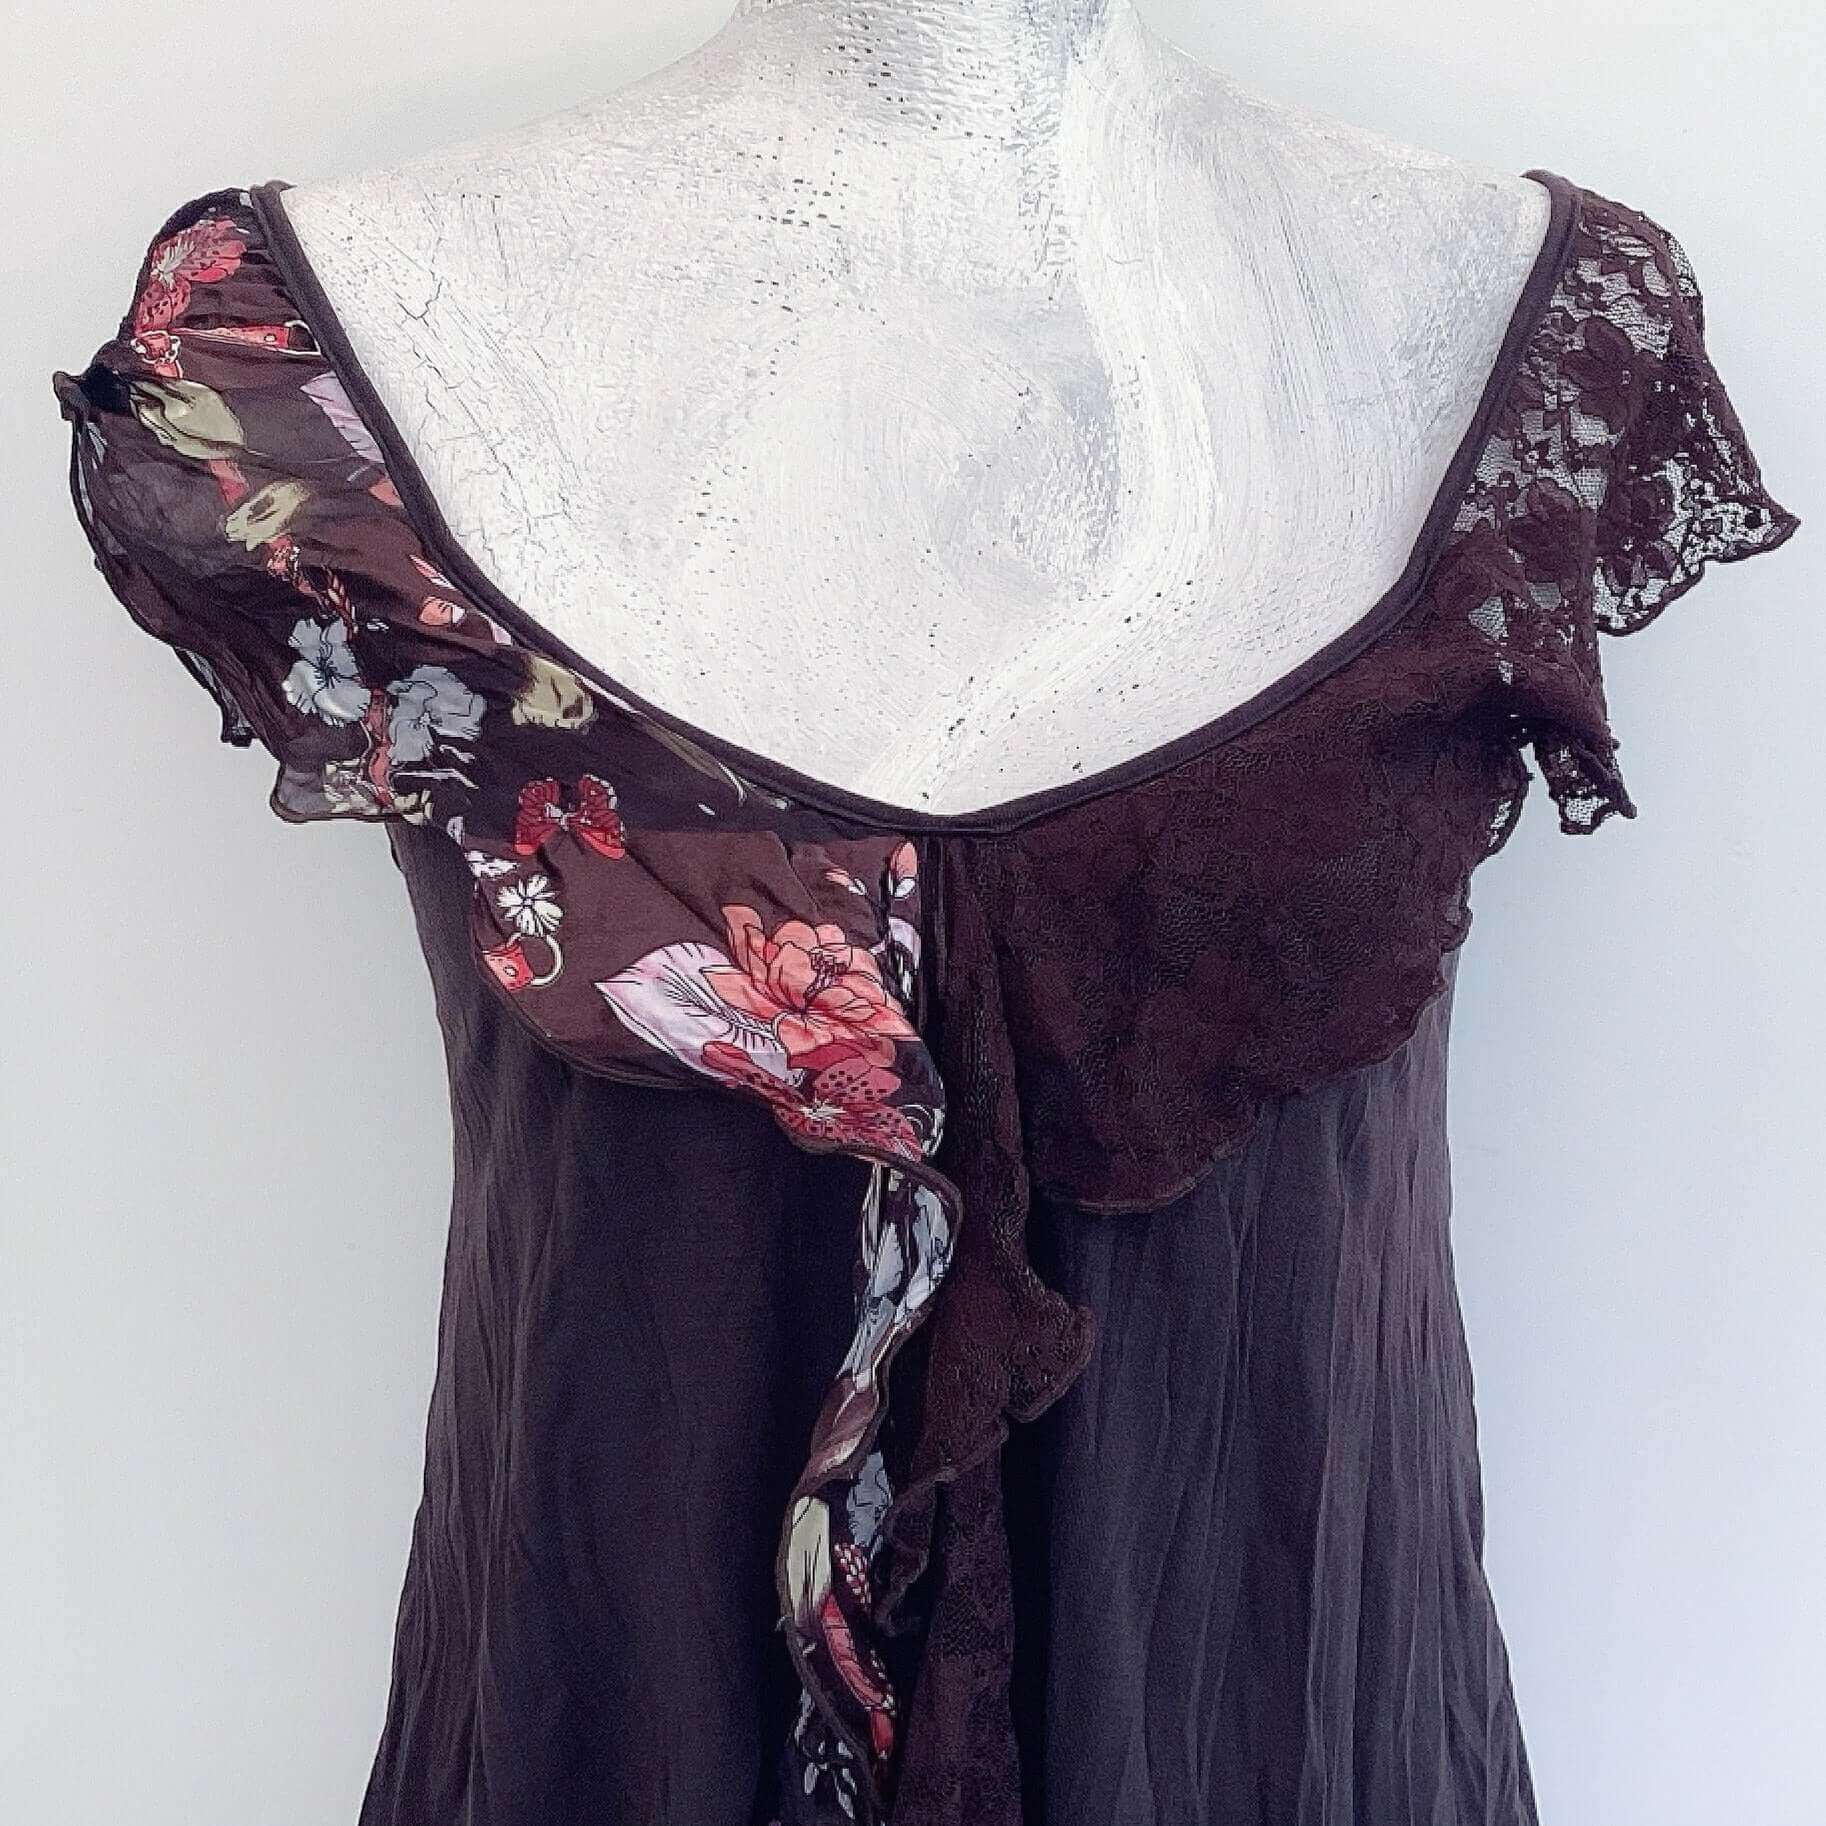 Detail of camisole, contrasting, patterned, wide chiffon frill straps, joining at center bust, flowing down in front.